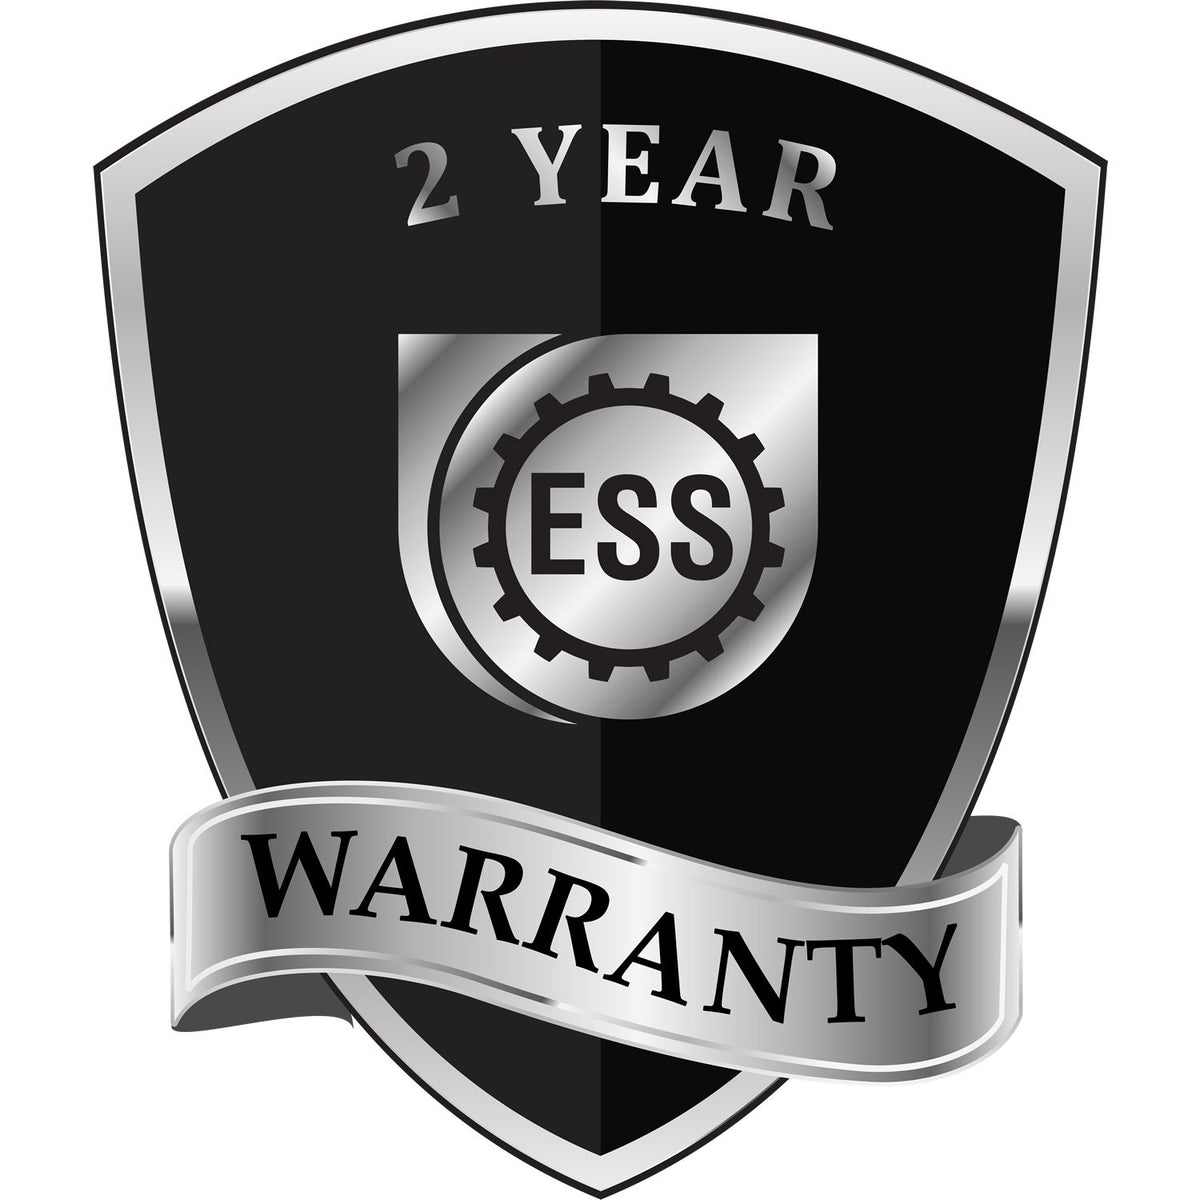 A badge or emblem showing a warranty icon for the Soft Pocket Illinois Landscape Architect Embosser